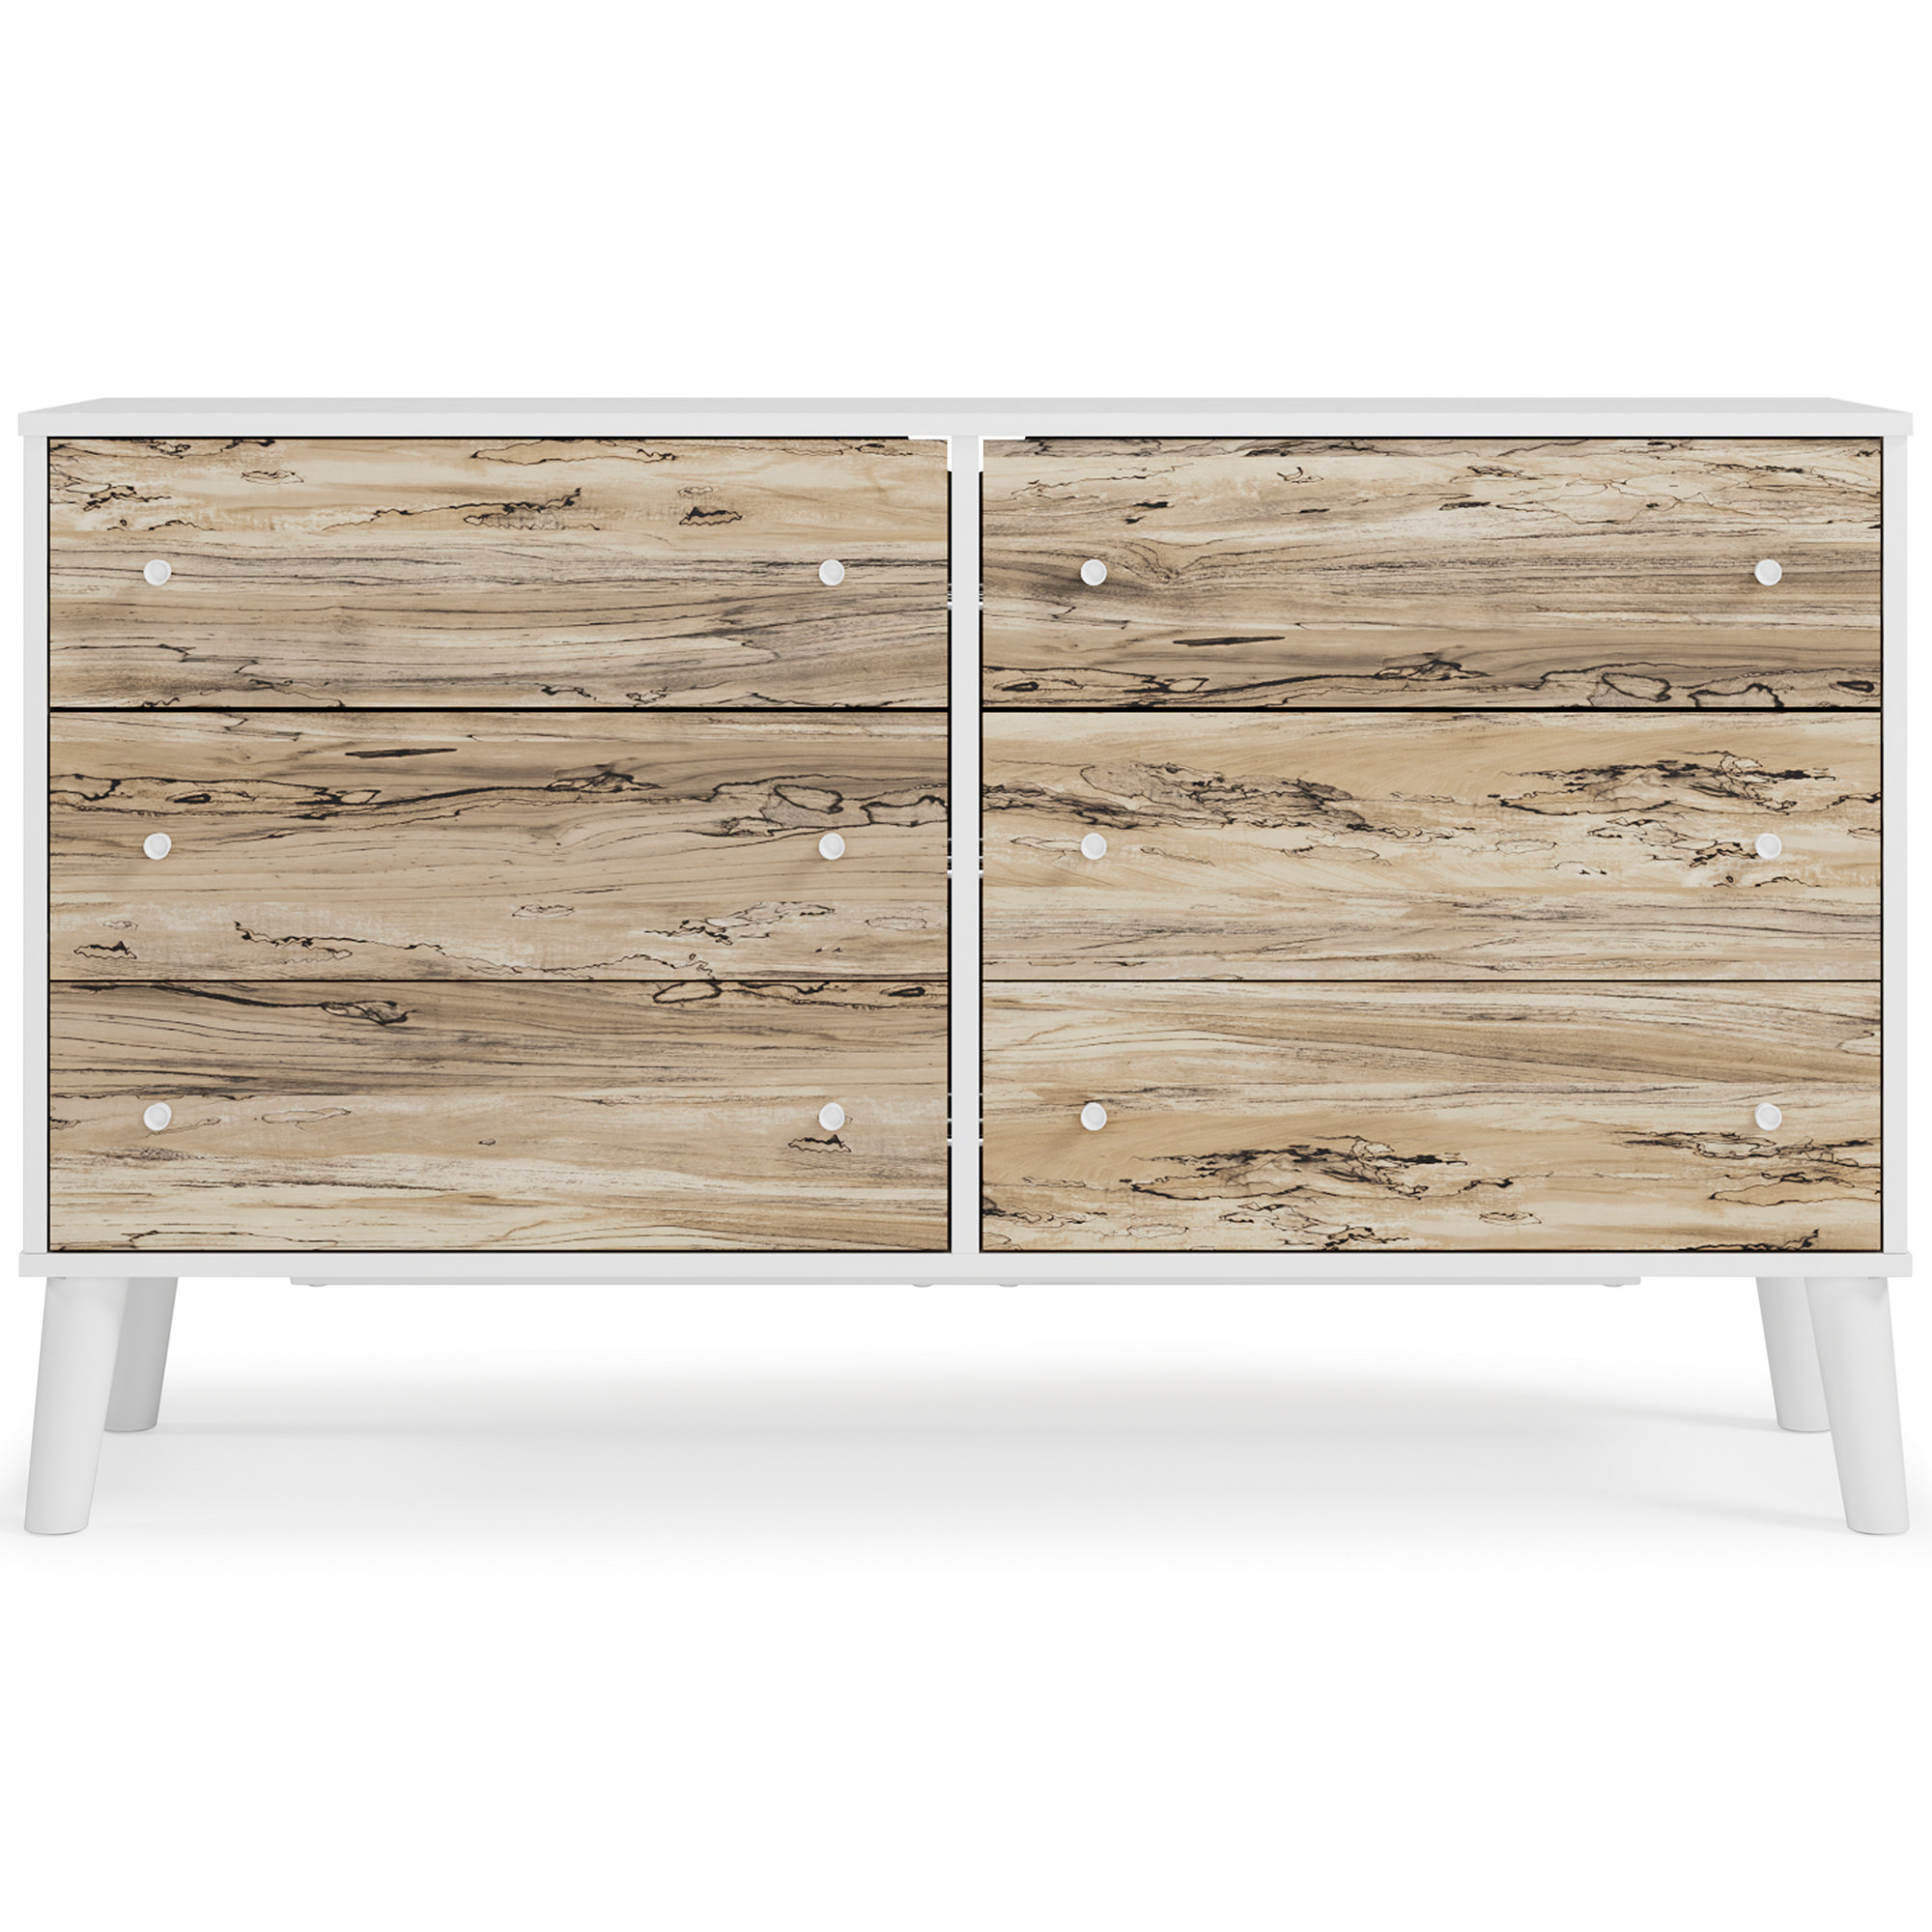 Signature Design by Ashley Contemporary Piperton 6 Drawer Dresser, Two-tone Brown/White - image 4 of 7